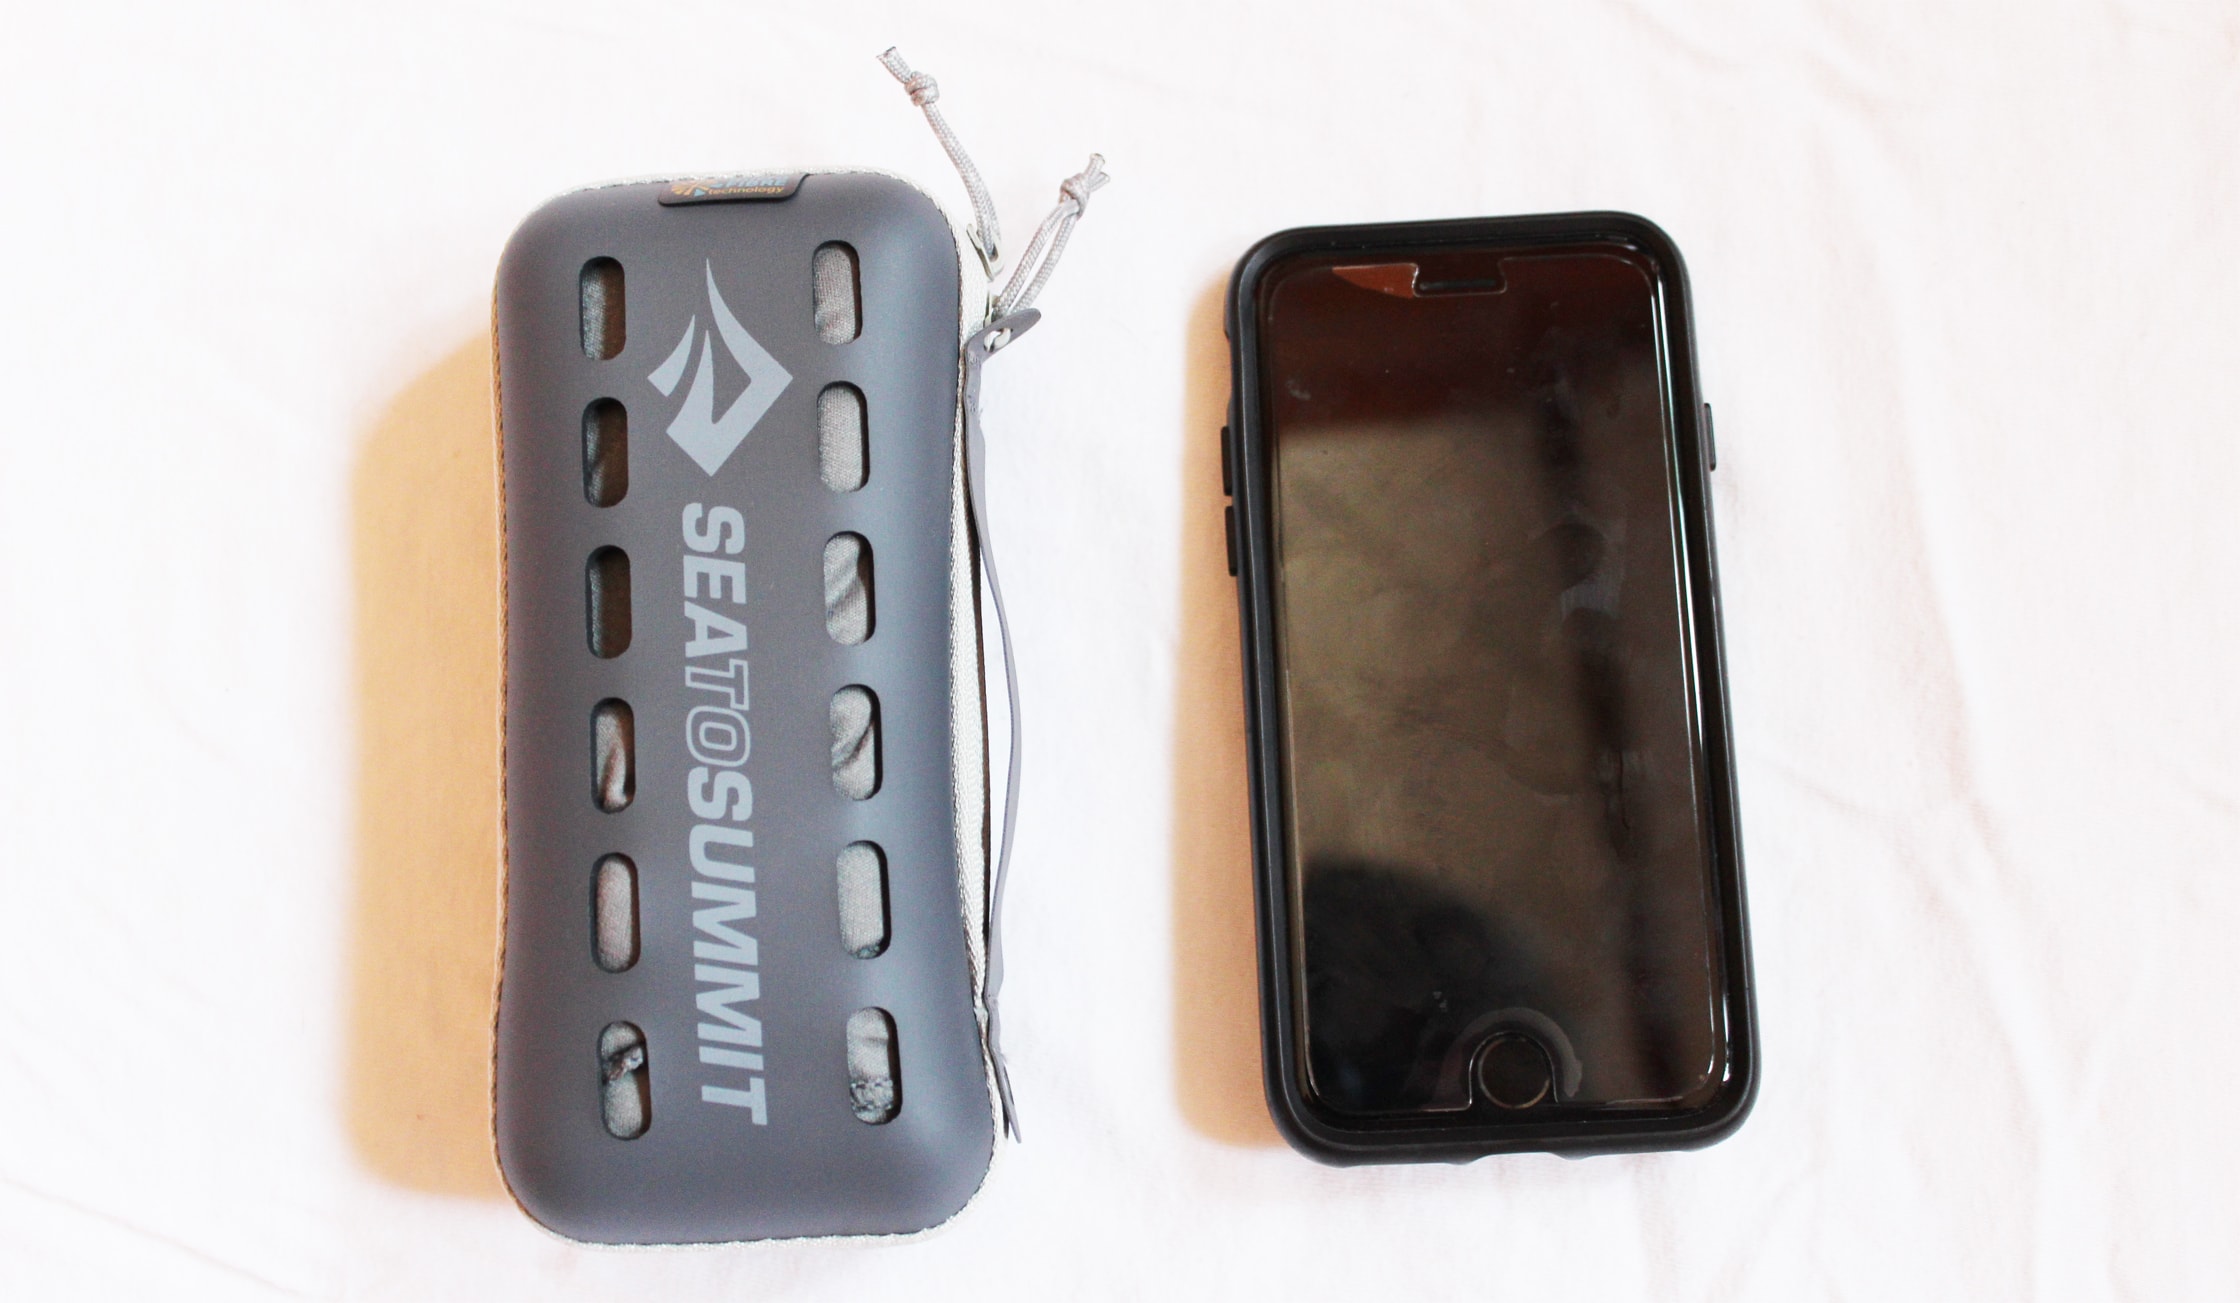 Sea to Summit Pocket Towel Size Compared to iPhone 6